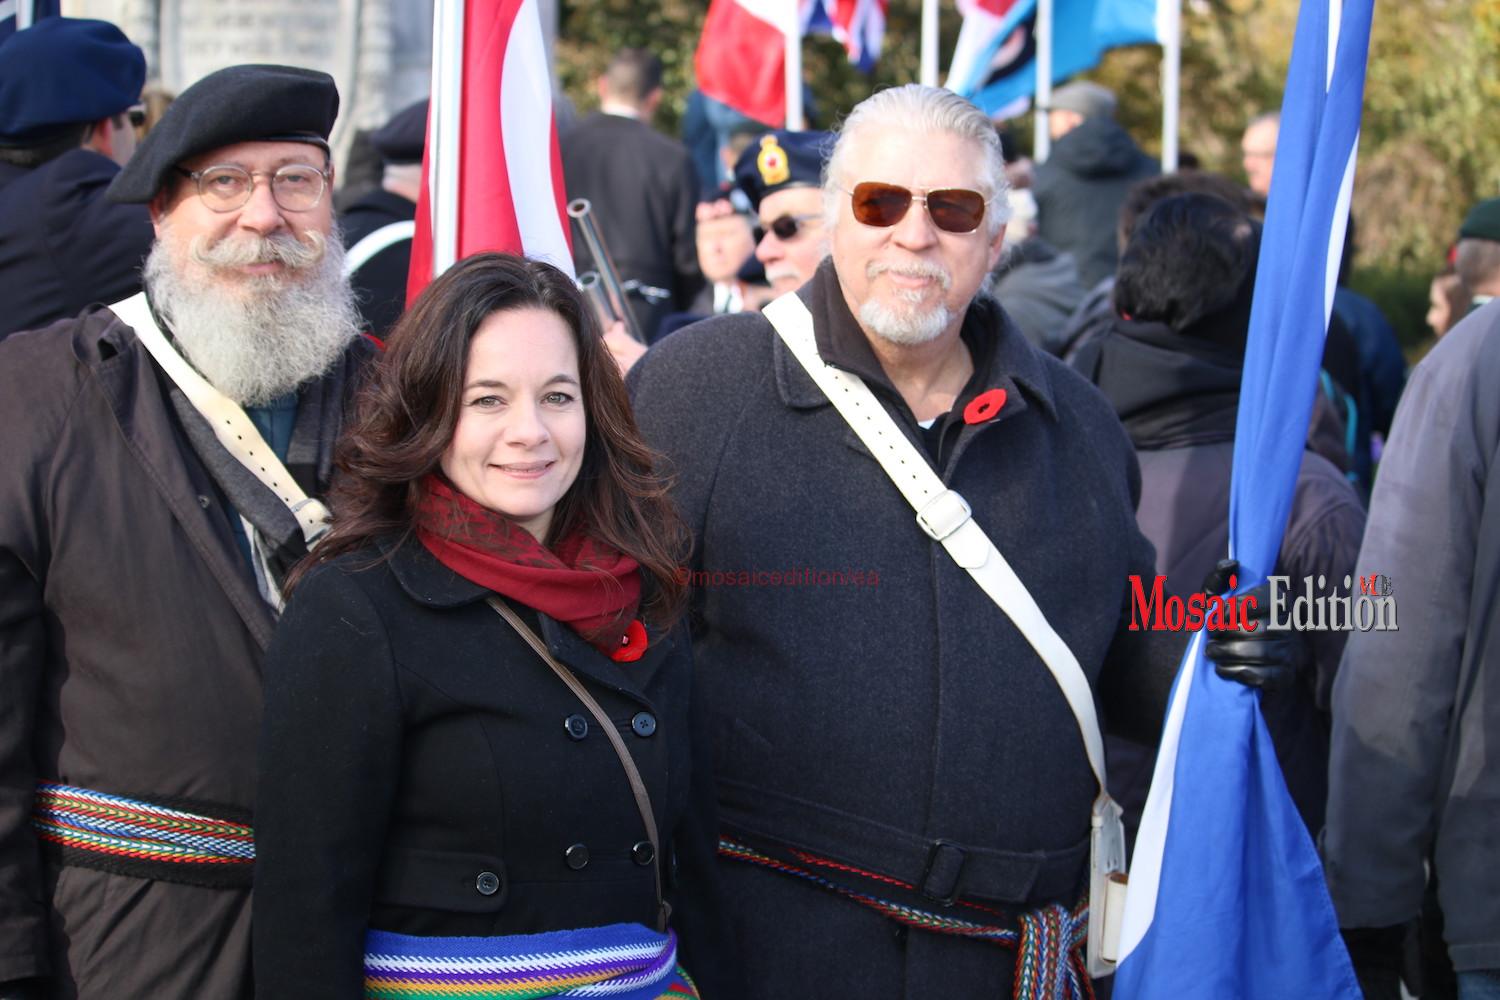 The Métis Nation was represented at the ceremony. Canada’s Indigenous fought alongside Canada in many wars.